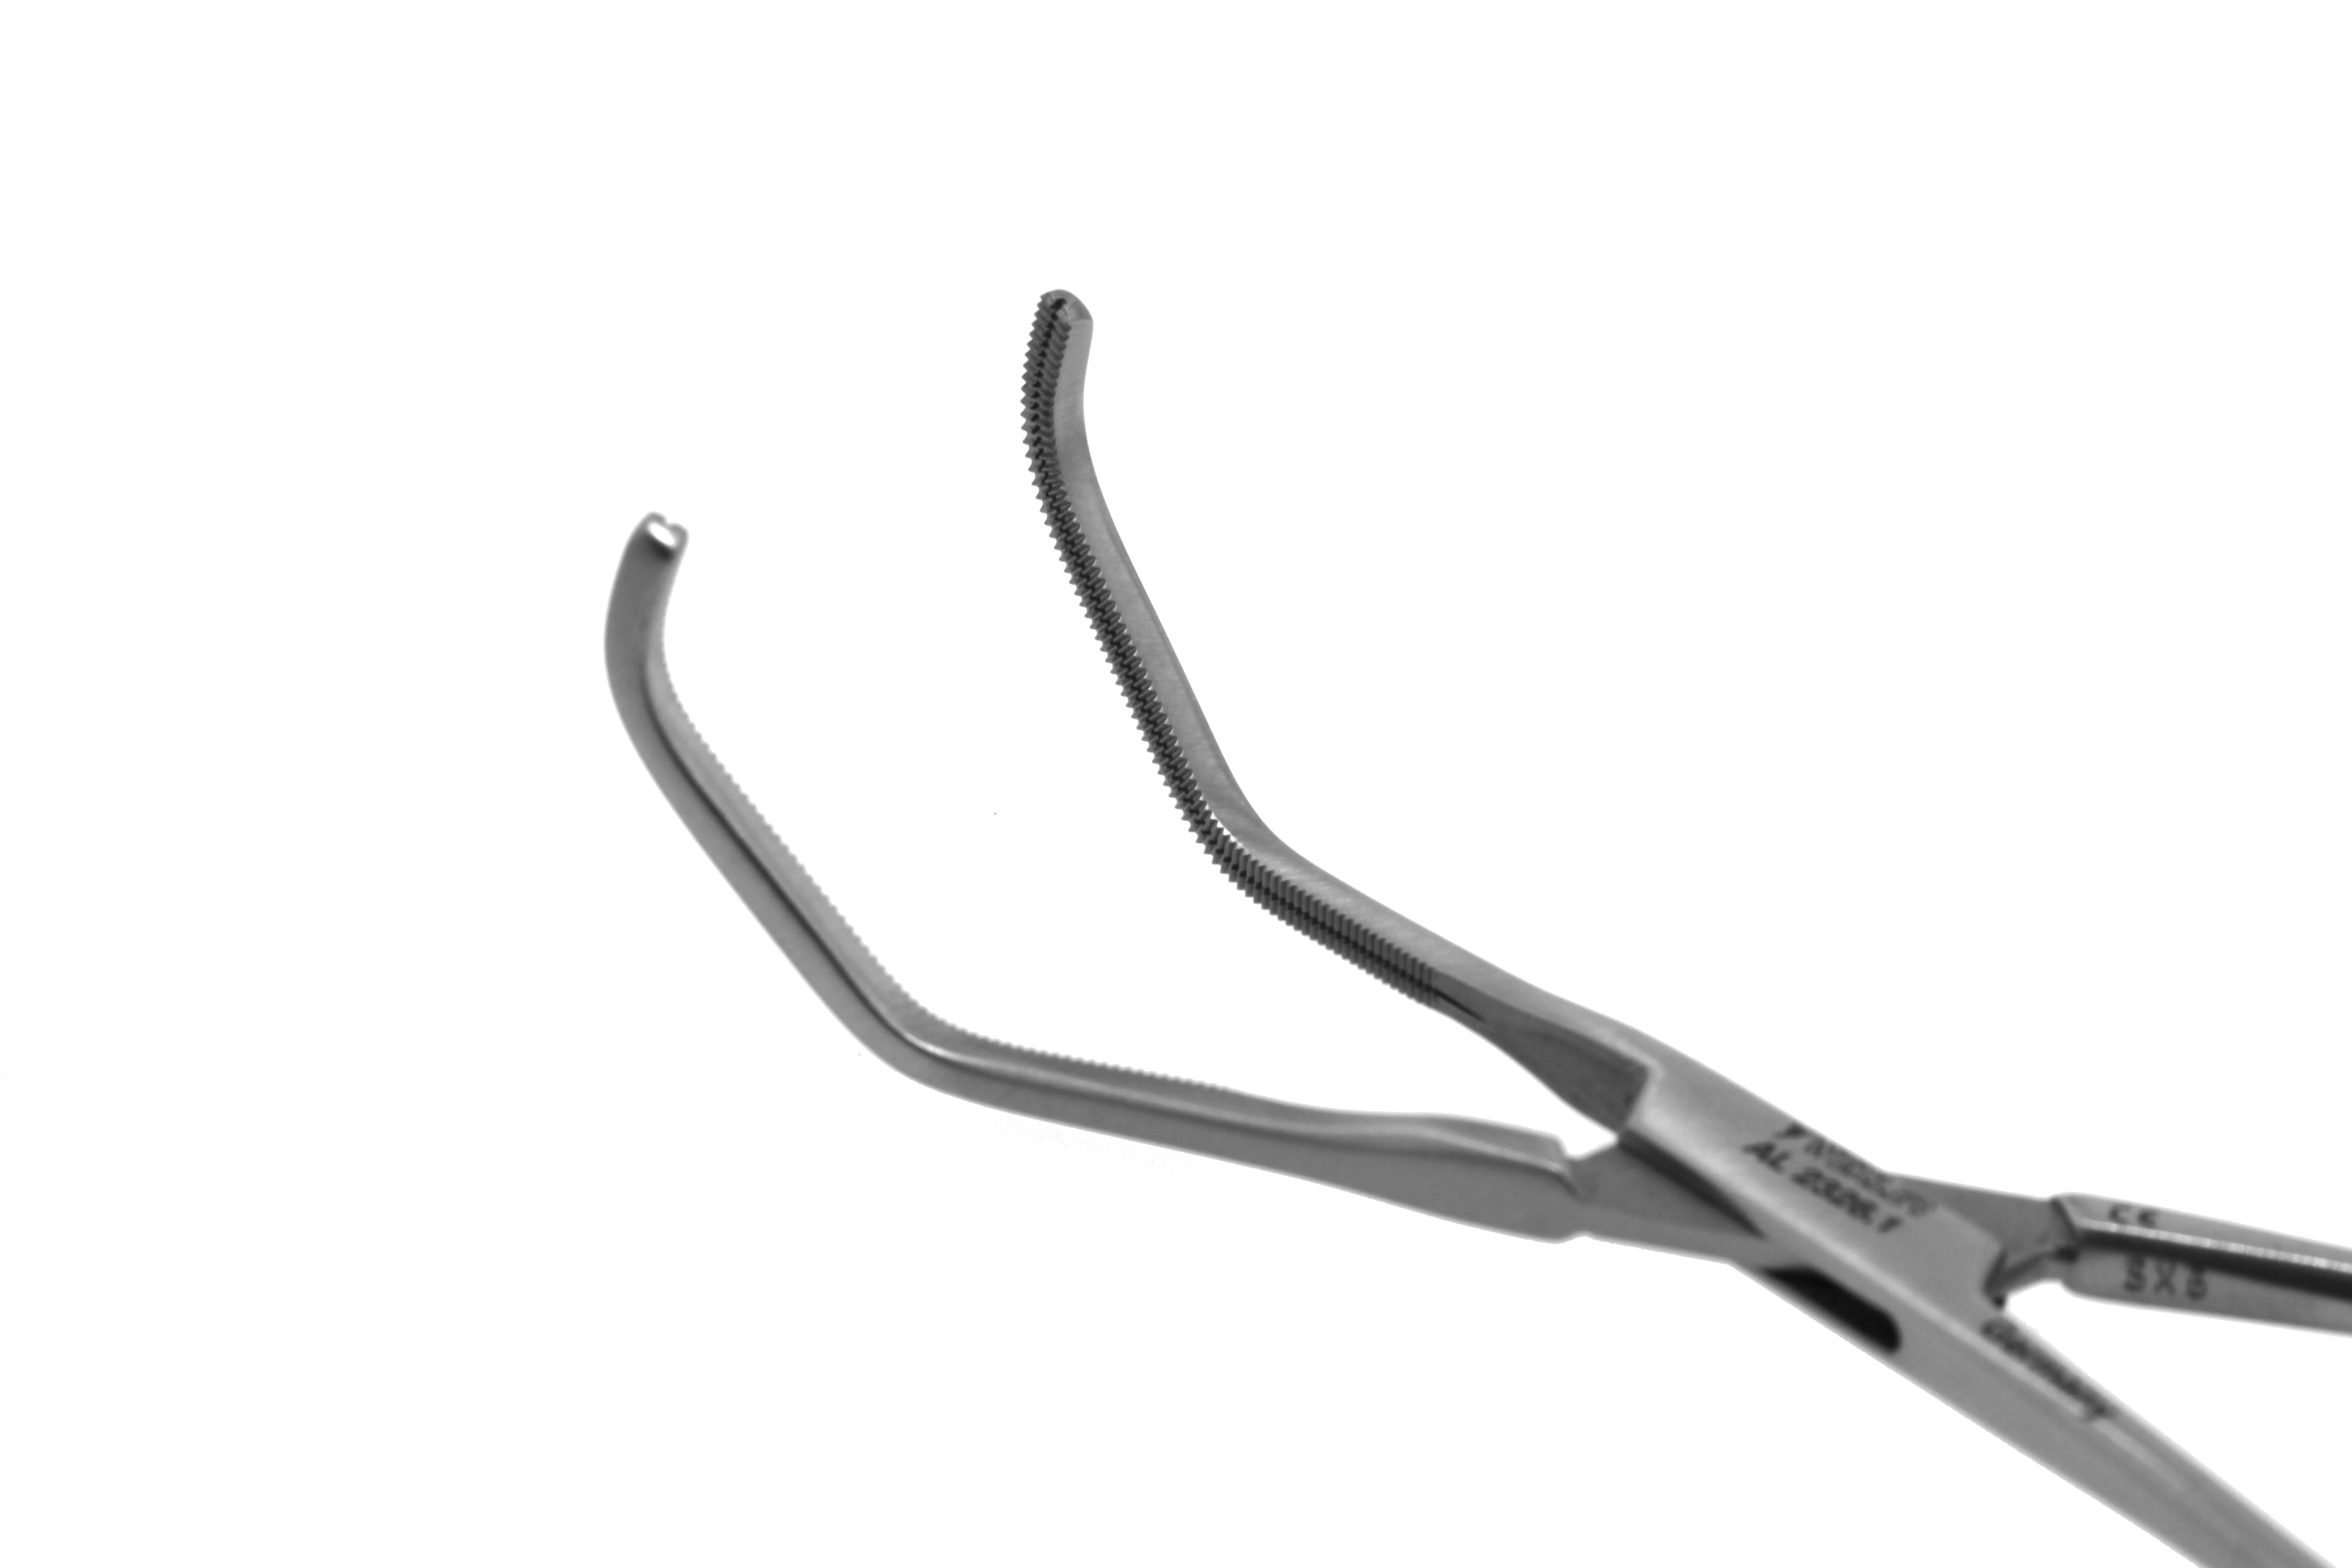 Wexler Baby Vascular Clamps - 16mm Angled Cooley Atraumatic jaws